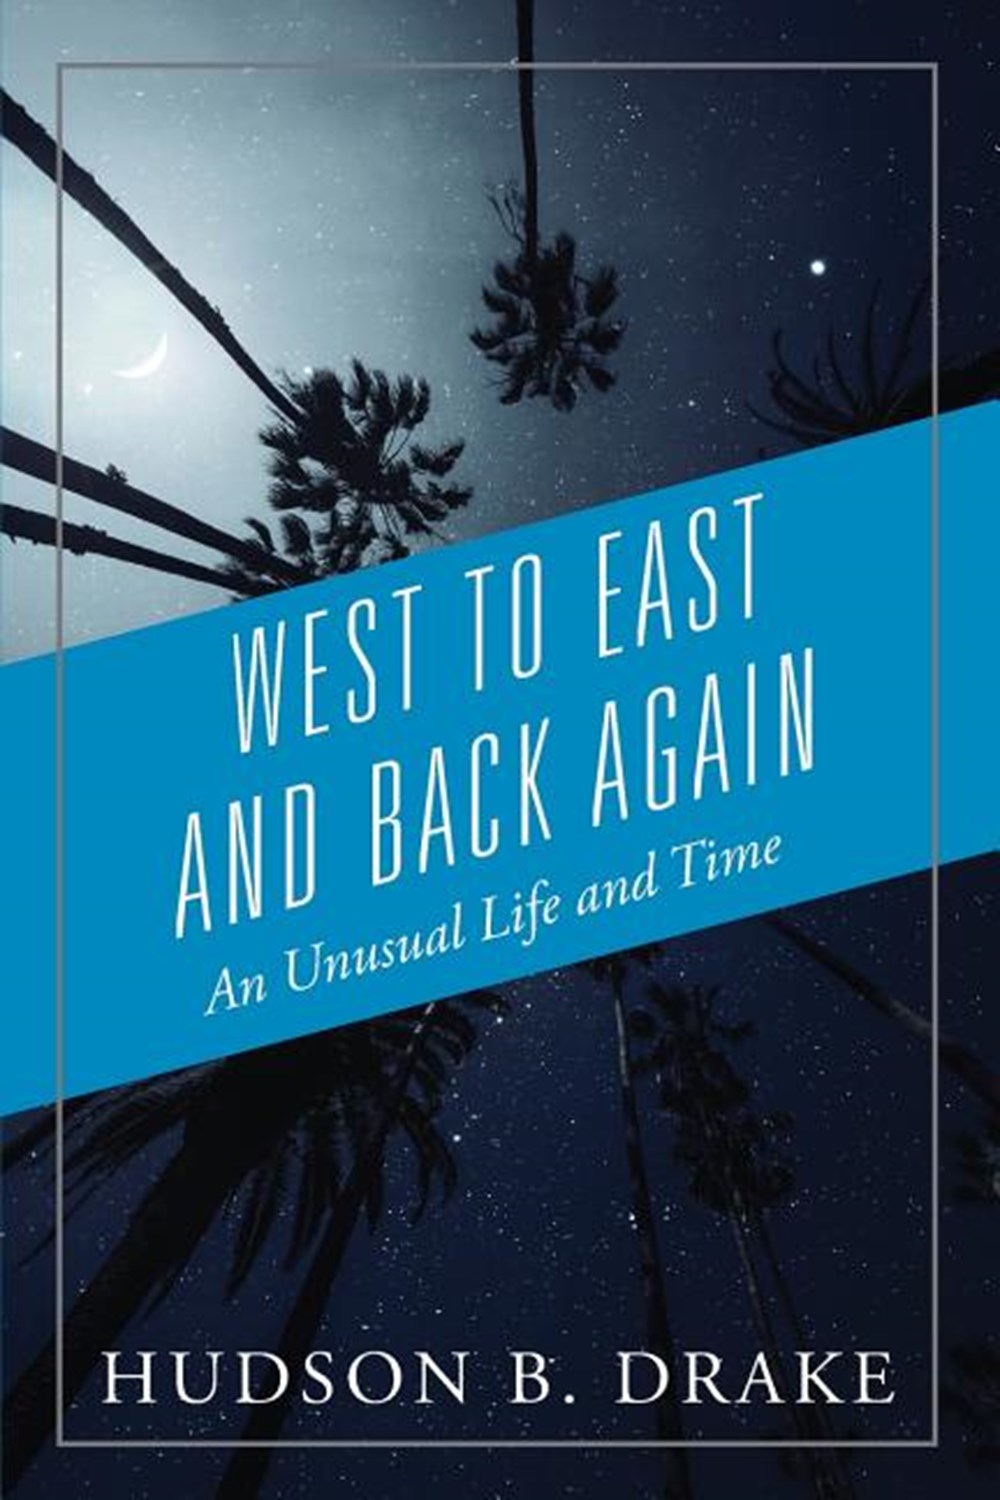 West to East and Back Again: An Unusual Life and Time